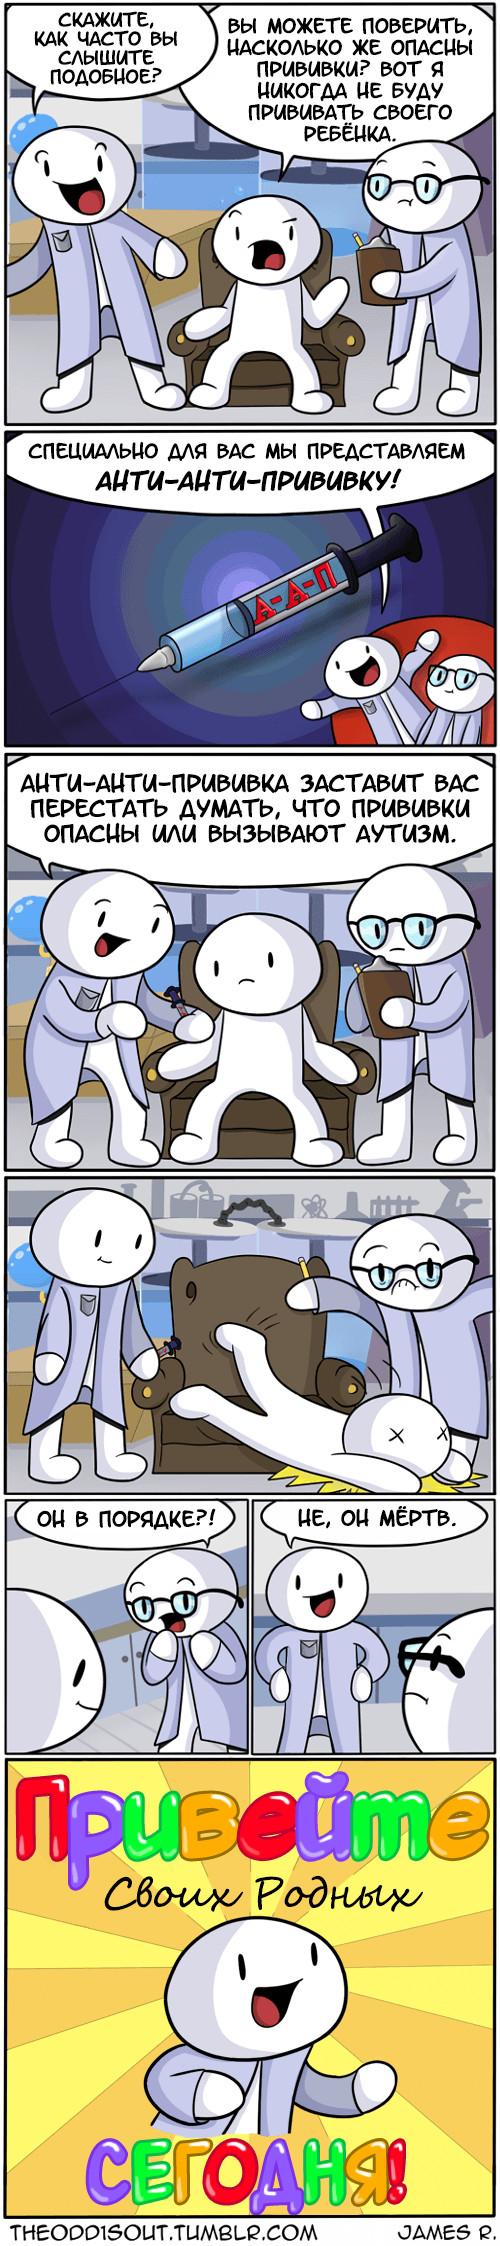 Vaccinations - My, Comics, Theodd1sout, Graft, Anti-vaccines, Autistic Disorders, Disease, Longpost, Vaccination